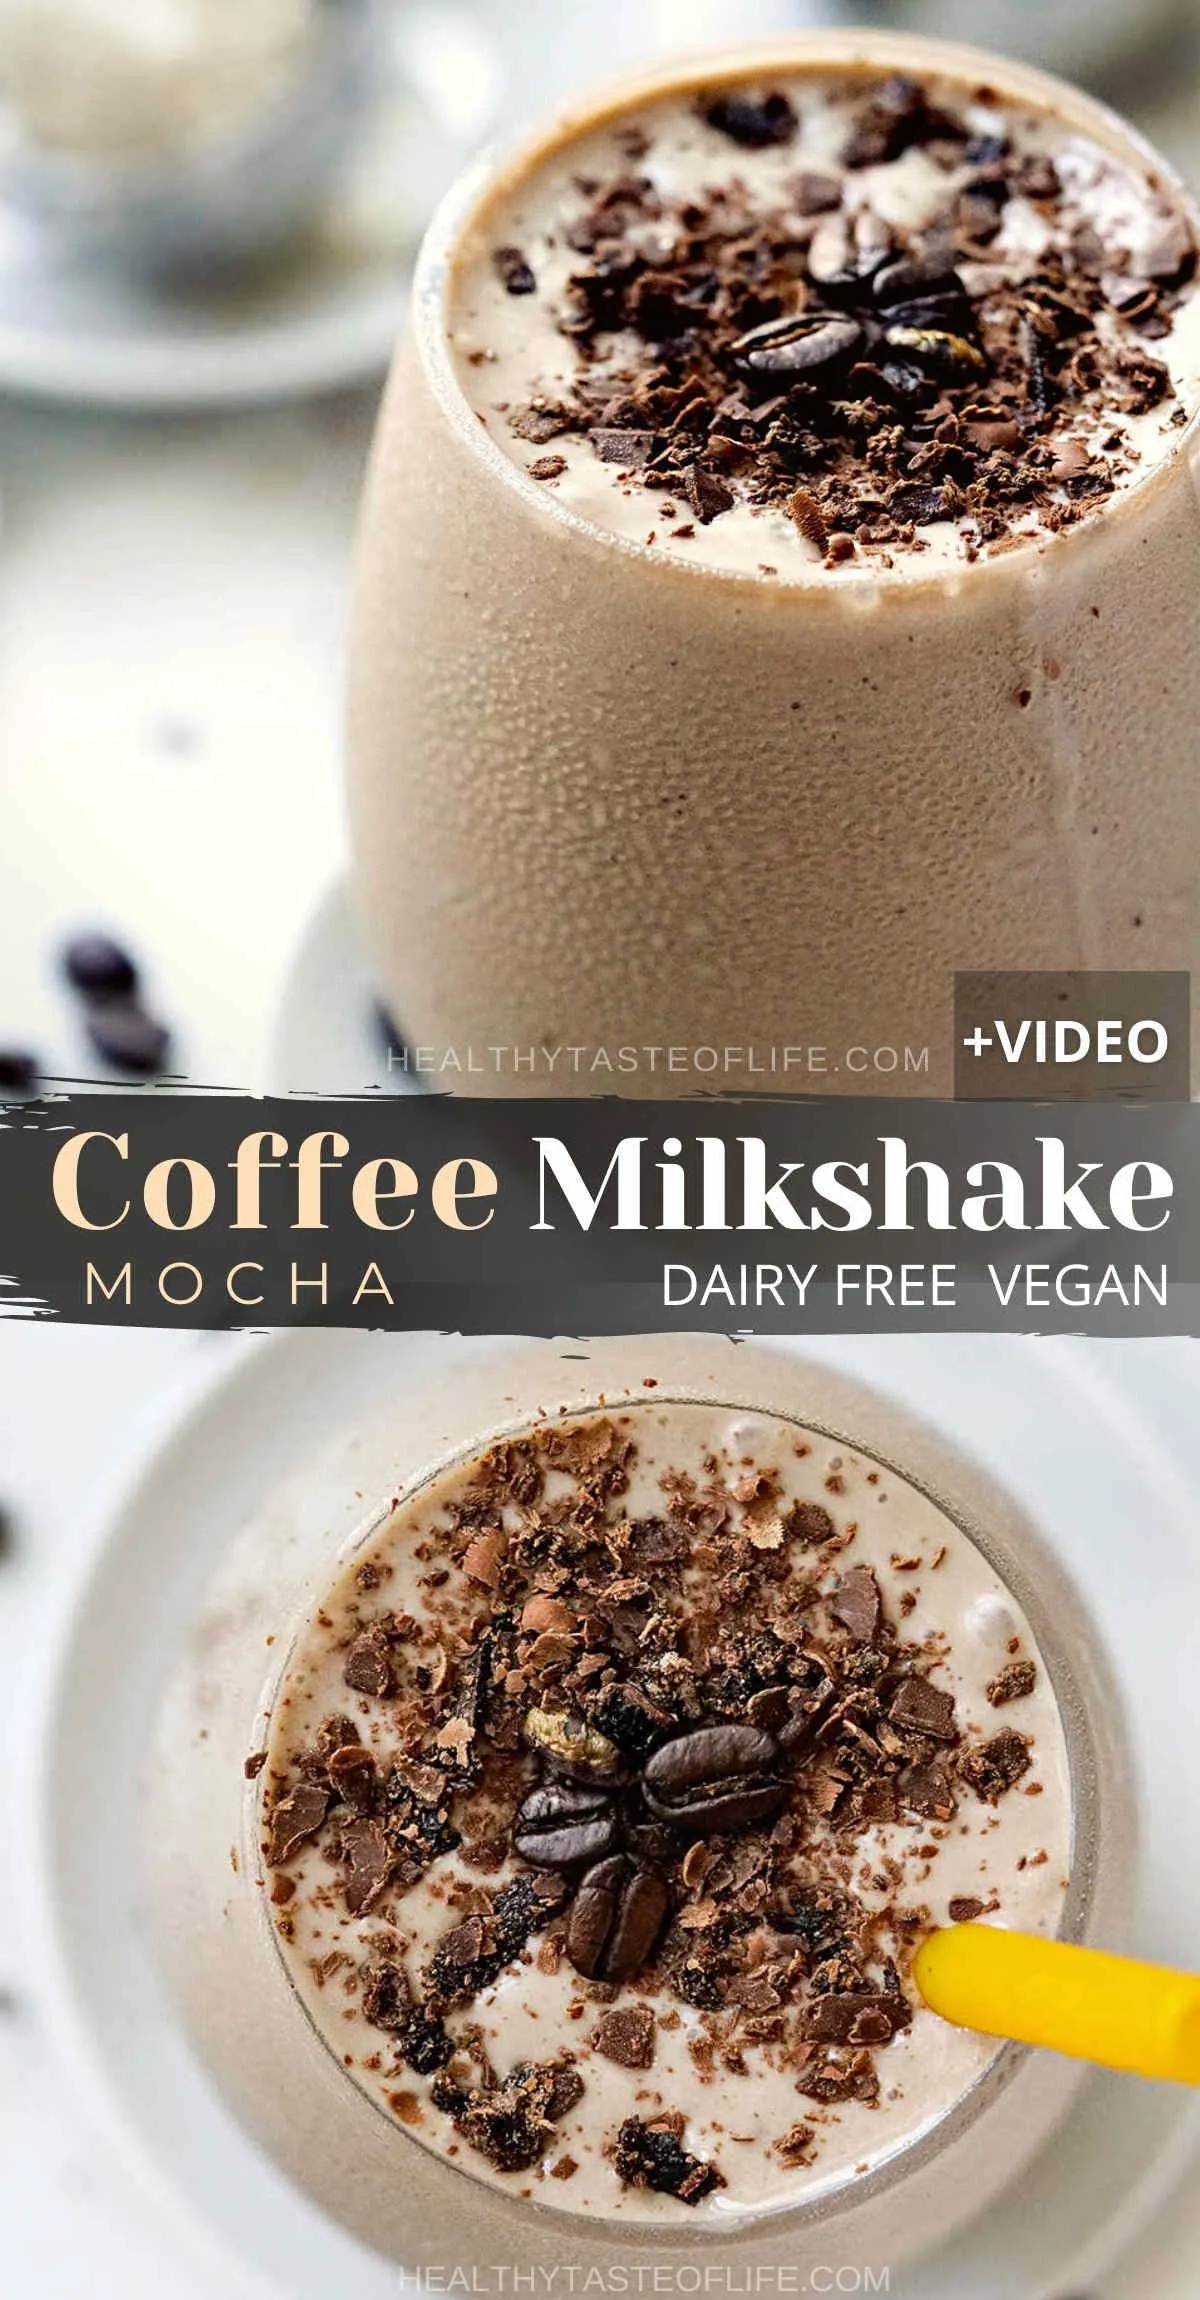 This coffee milkshake recipe enriched with espresso and chocolate hints has a nice and thick milkshake consistency due to the perfect ratio of liquid to ice cream. Not vegan? Just swap the ice cream. To whip up this coffee milkshake recipe you need about 10 min and a blender. This rich espresso milkshake is for true coffee lovers, it will burst with coffee mocha flavor! #coffeemilkshake #chocolatemilkshake  #espressomilkshake #milkshake